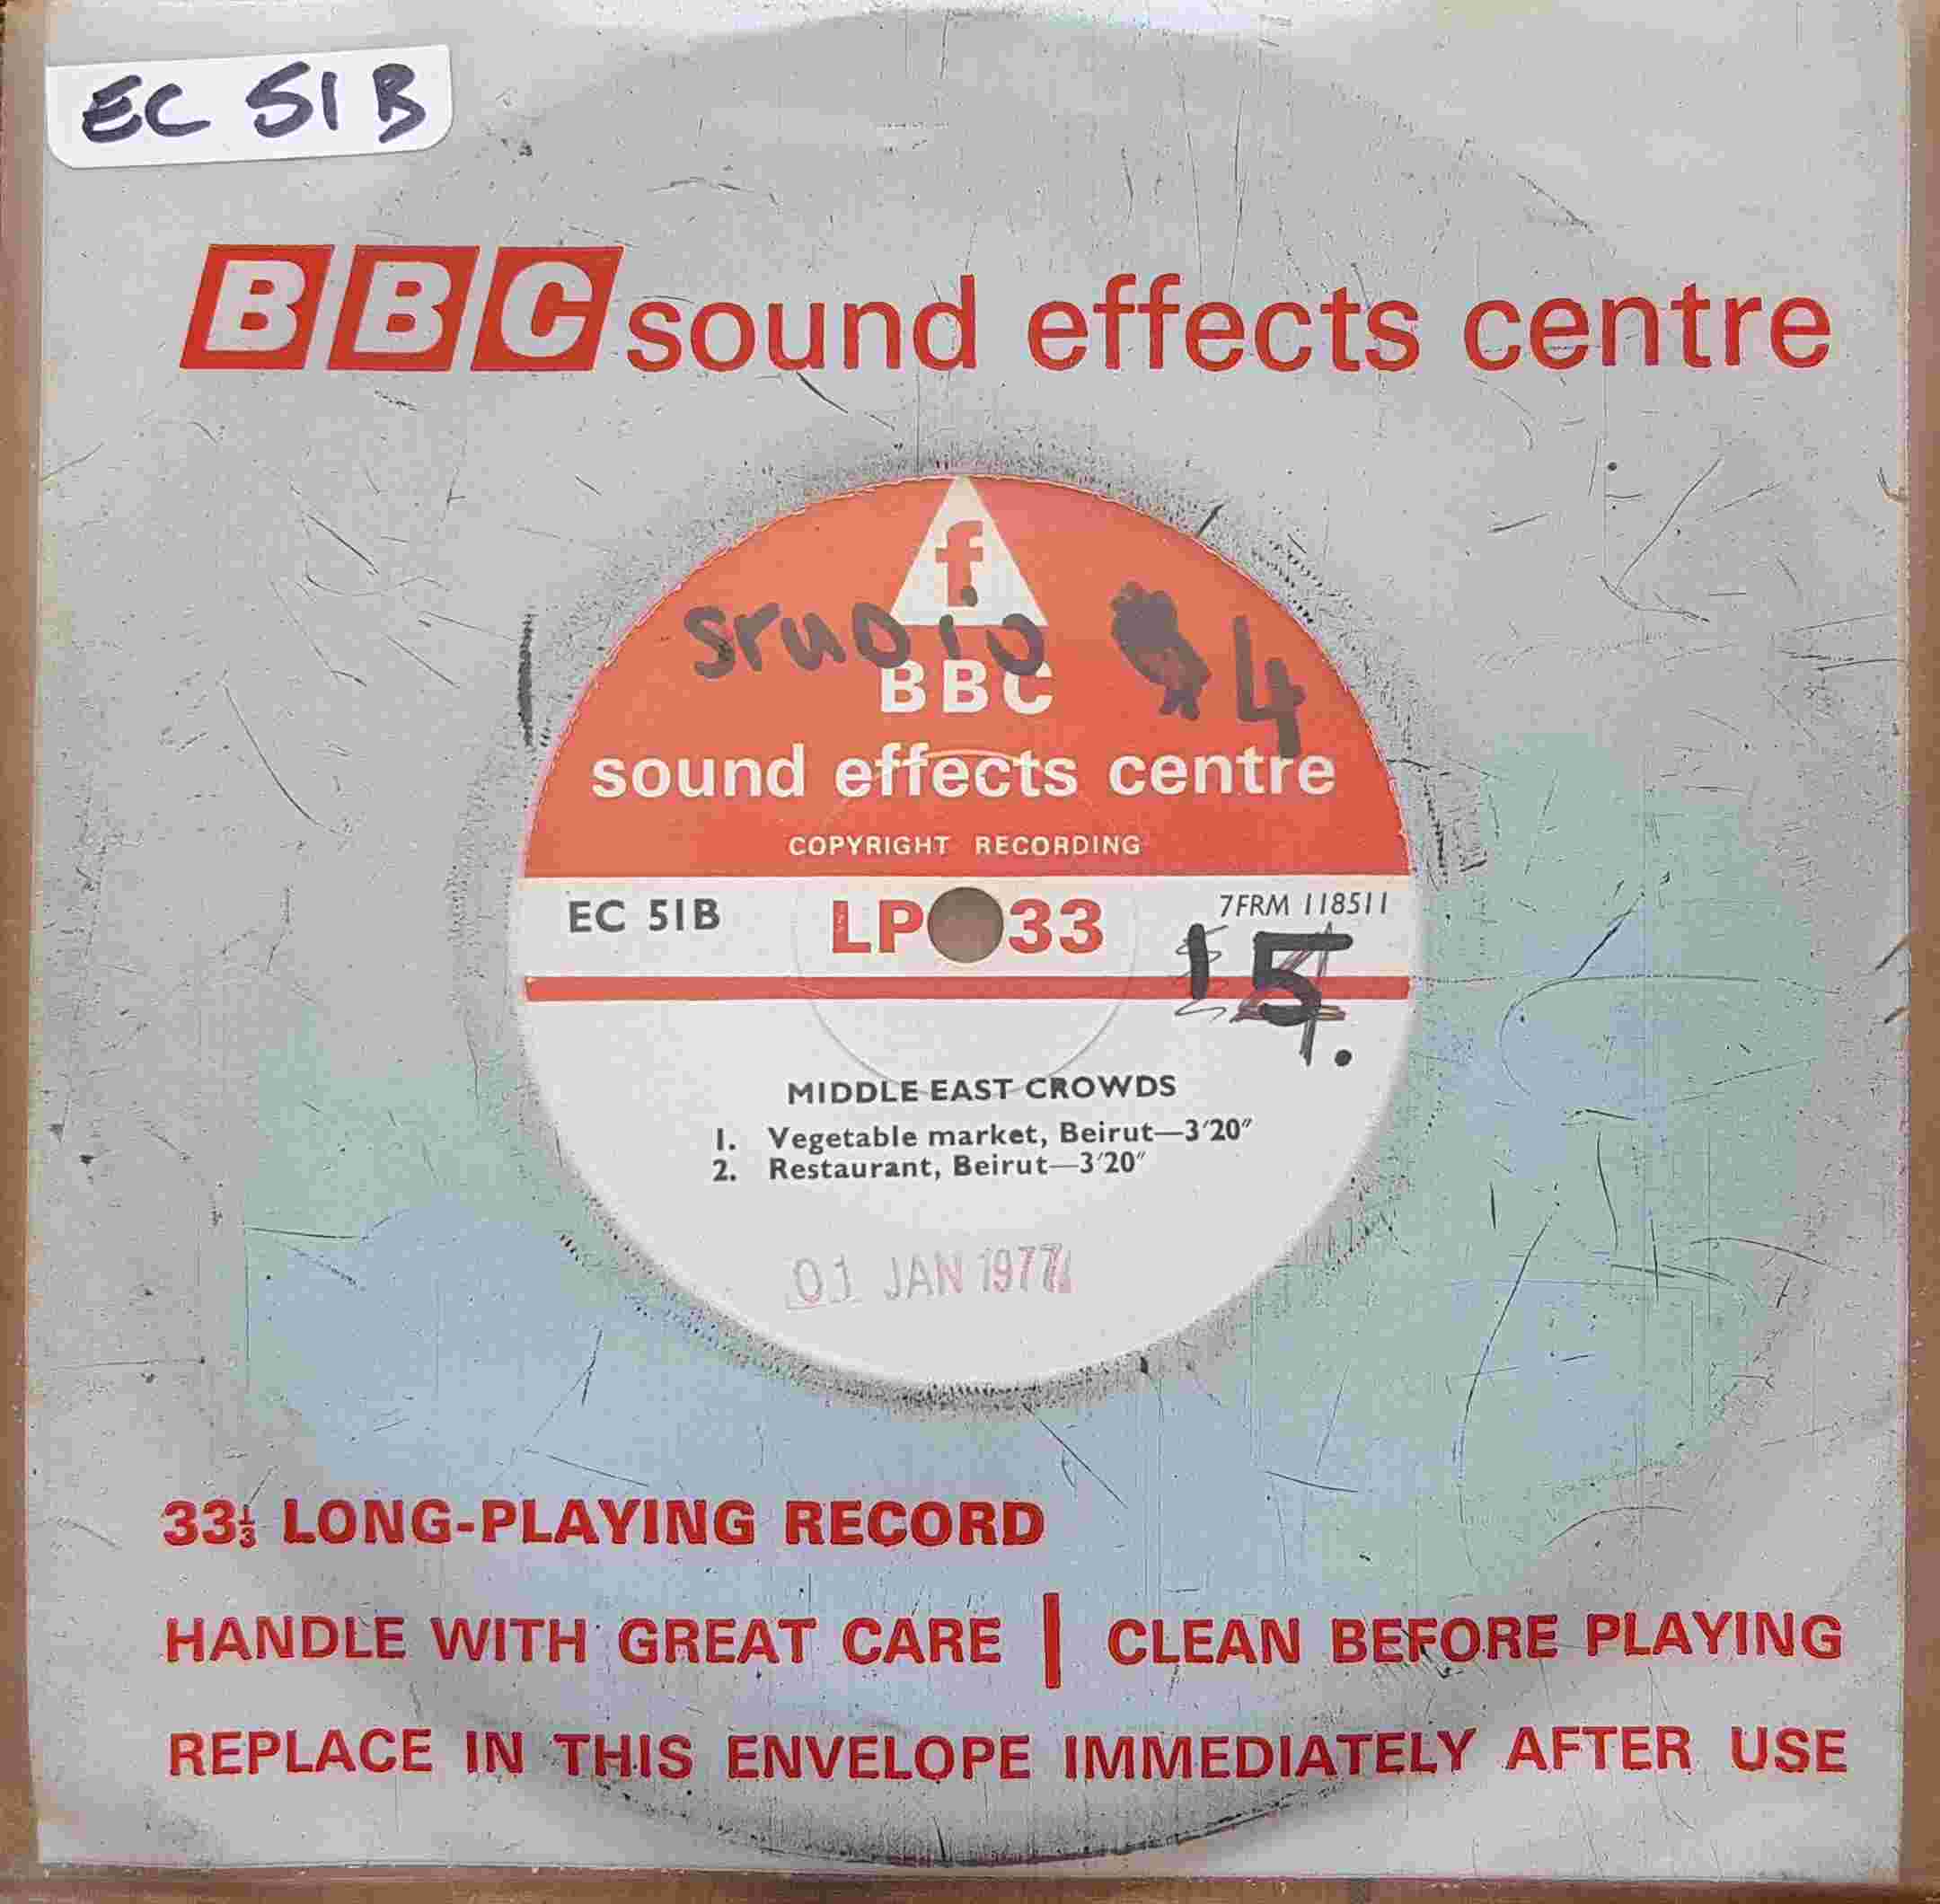 Picture of EC 51B Middle Eastern crowds by artist Not registered from the BBC singles - Records and Tapes library